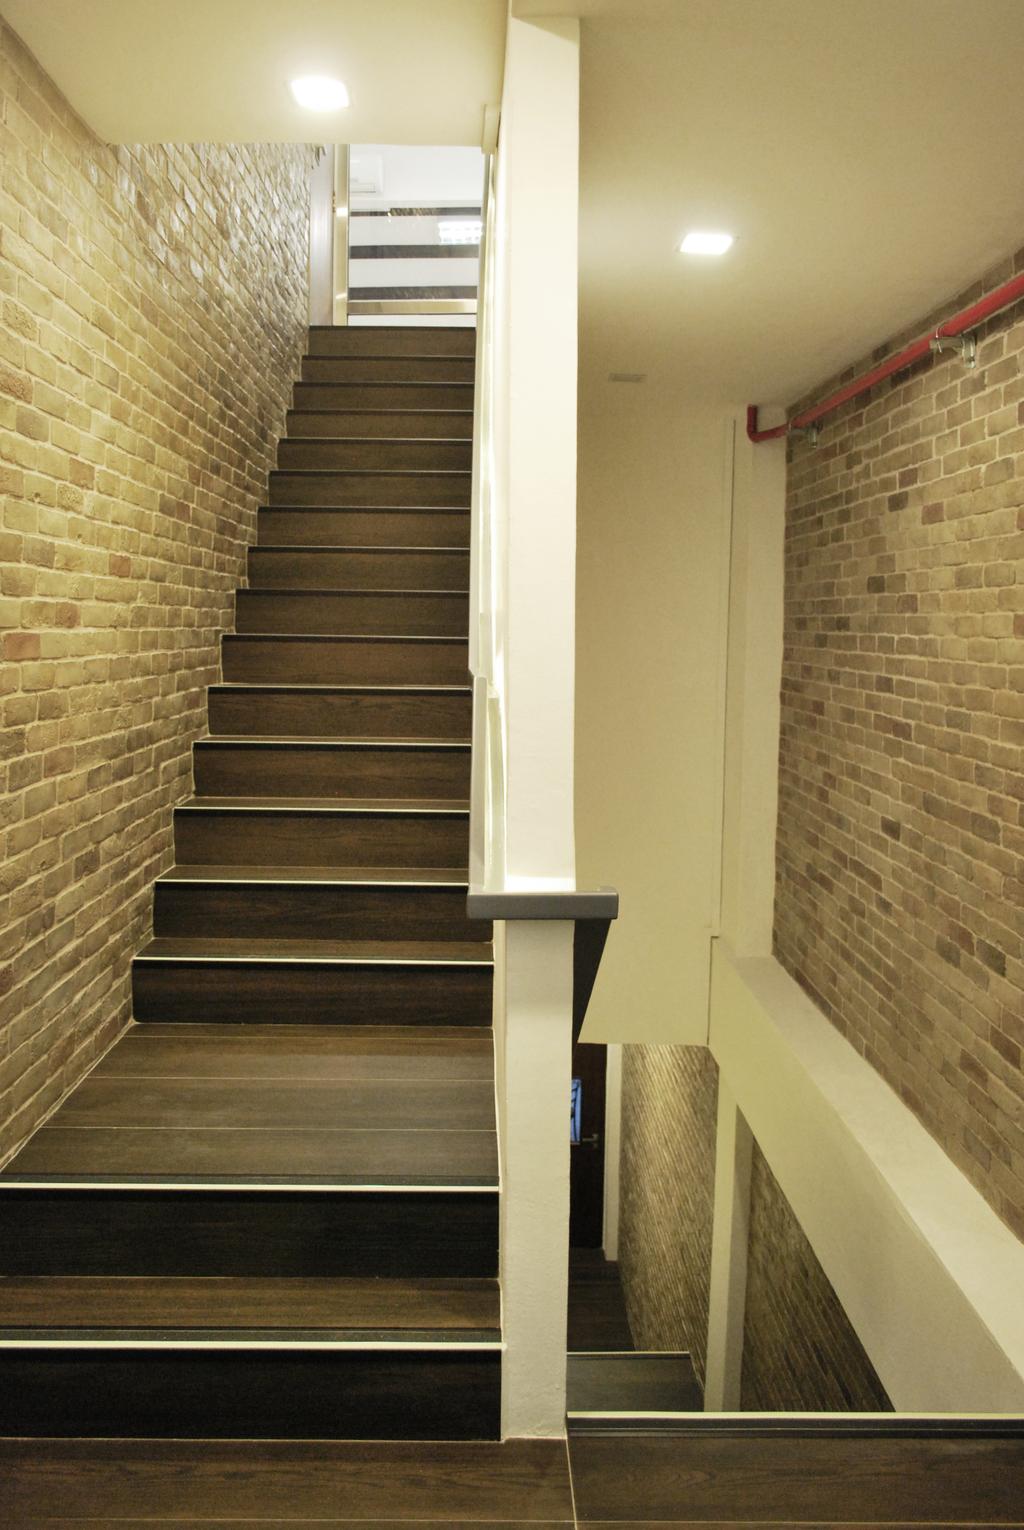 198 Office, Commercial, Architect, Czarl Architects, Transitional, Stairs, Staircase, Red Brick Wall